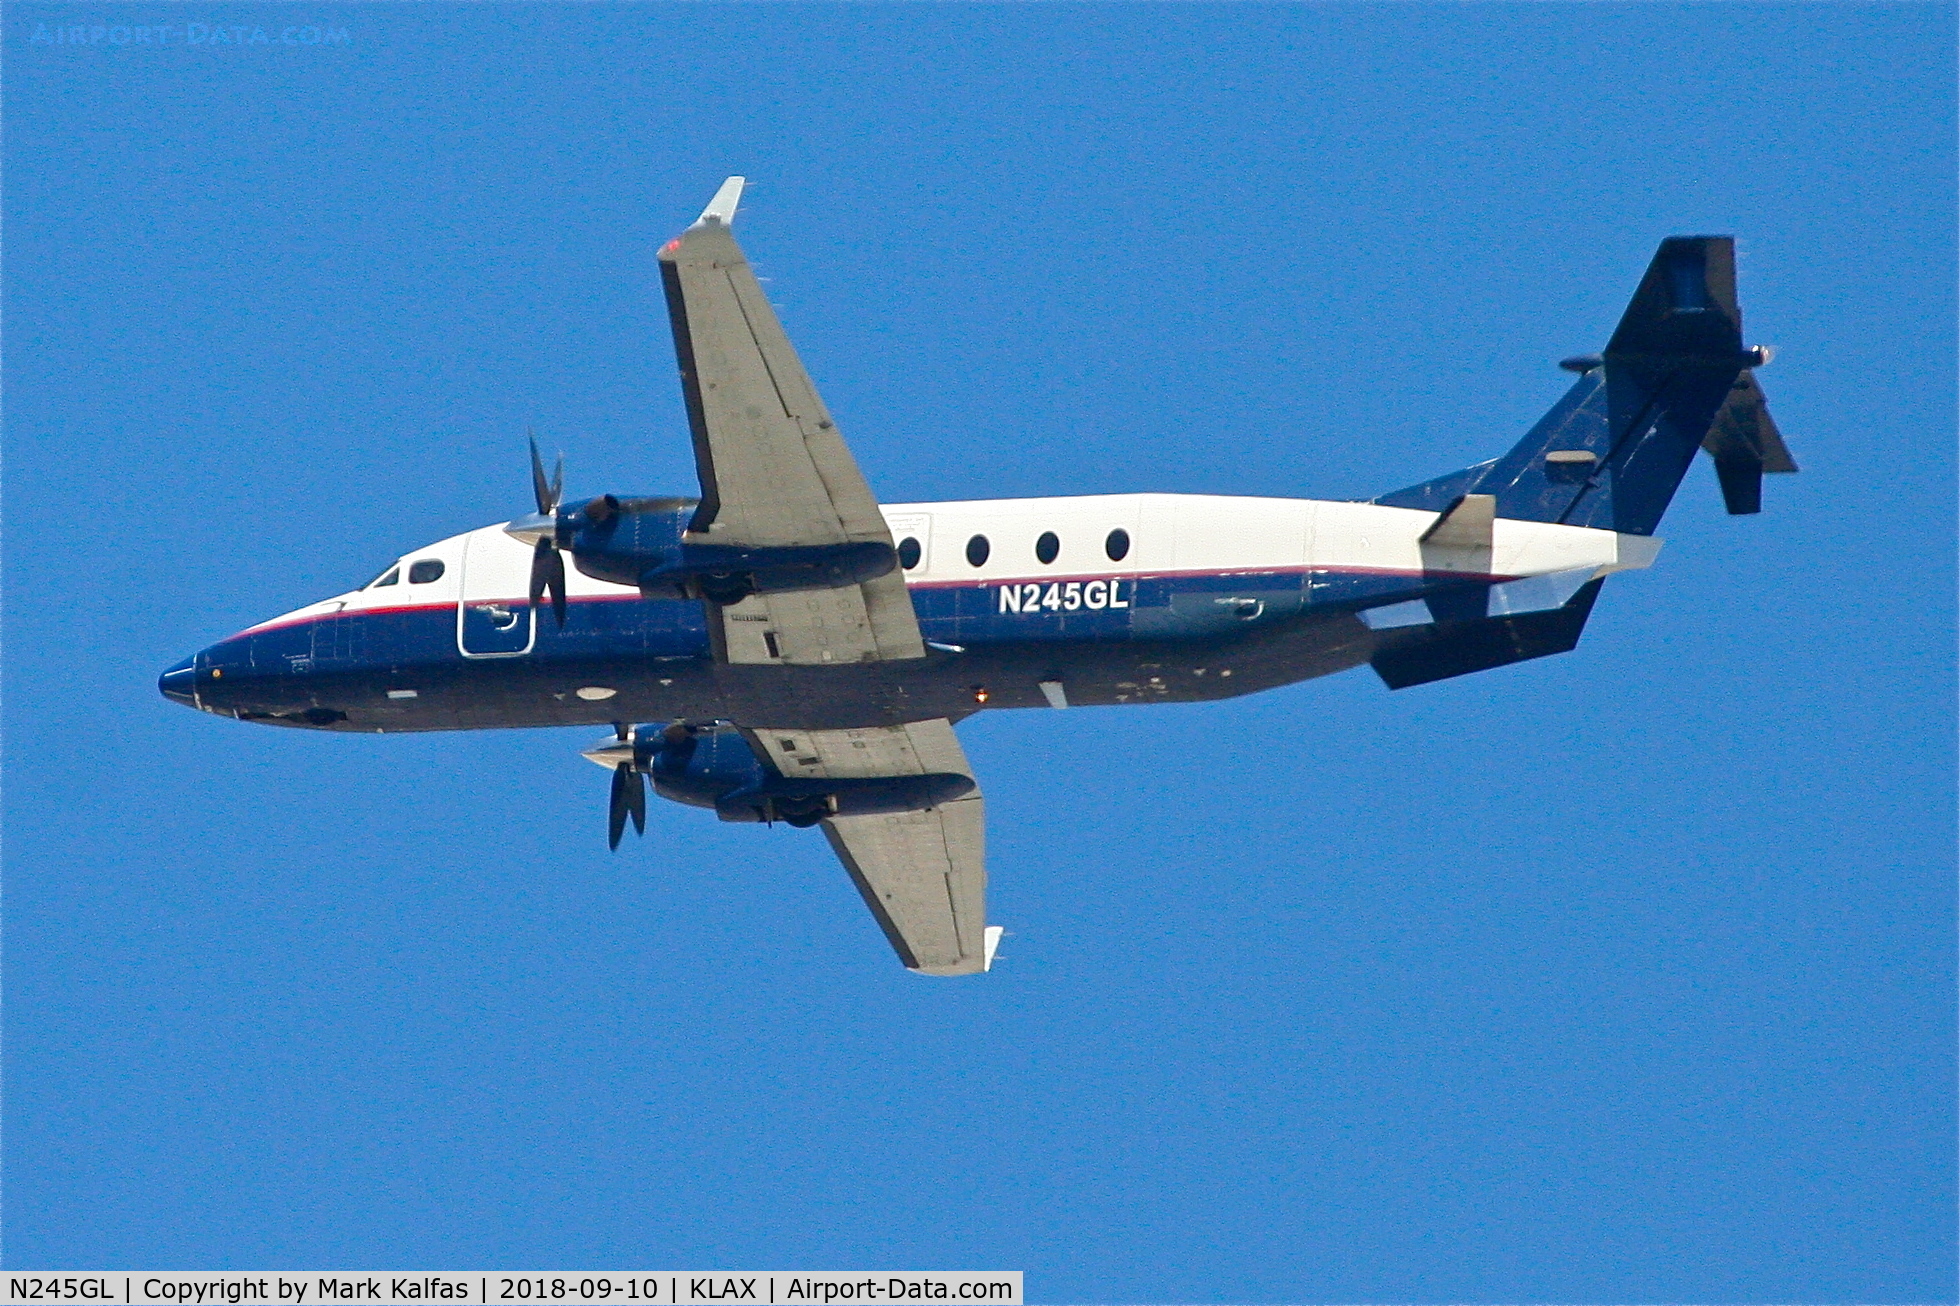 N245GL, 1996 Beech 1900D C/N UE-245, Departing 25R LAX. N245GL was withdrawn from service 2018-03-10.